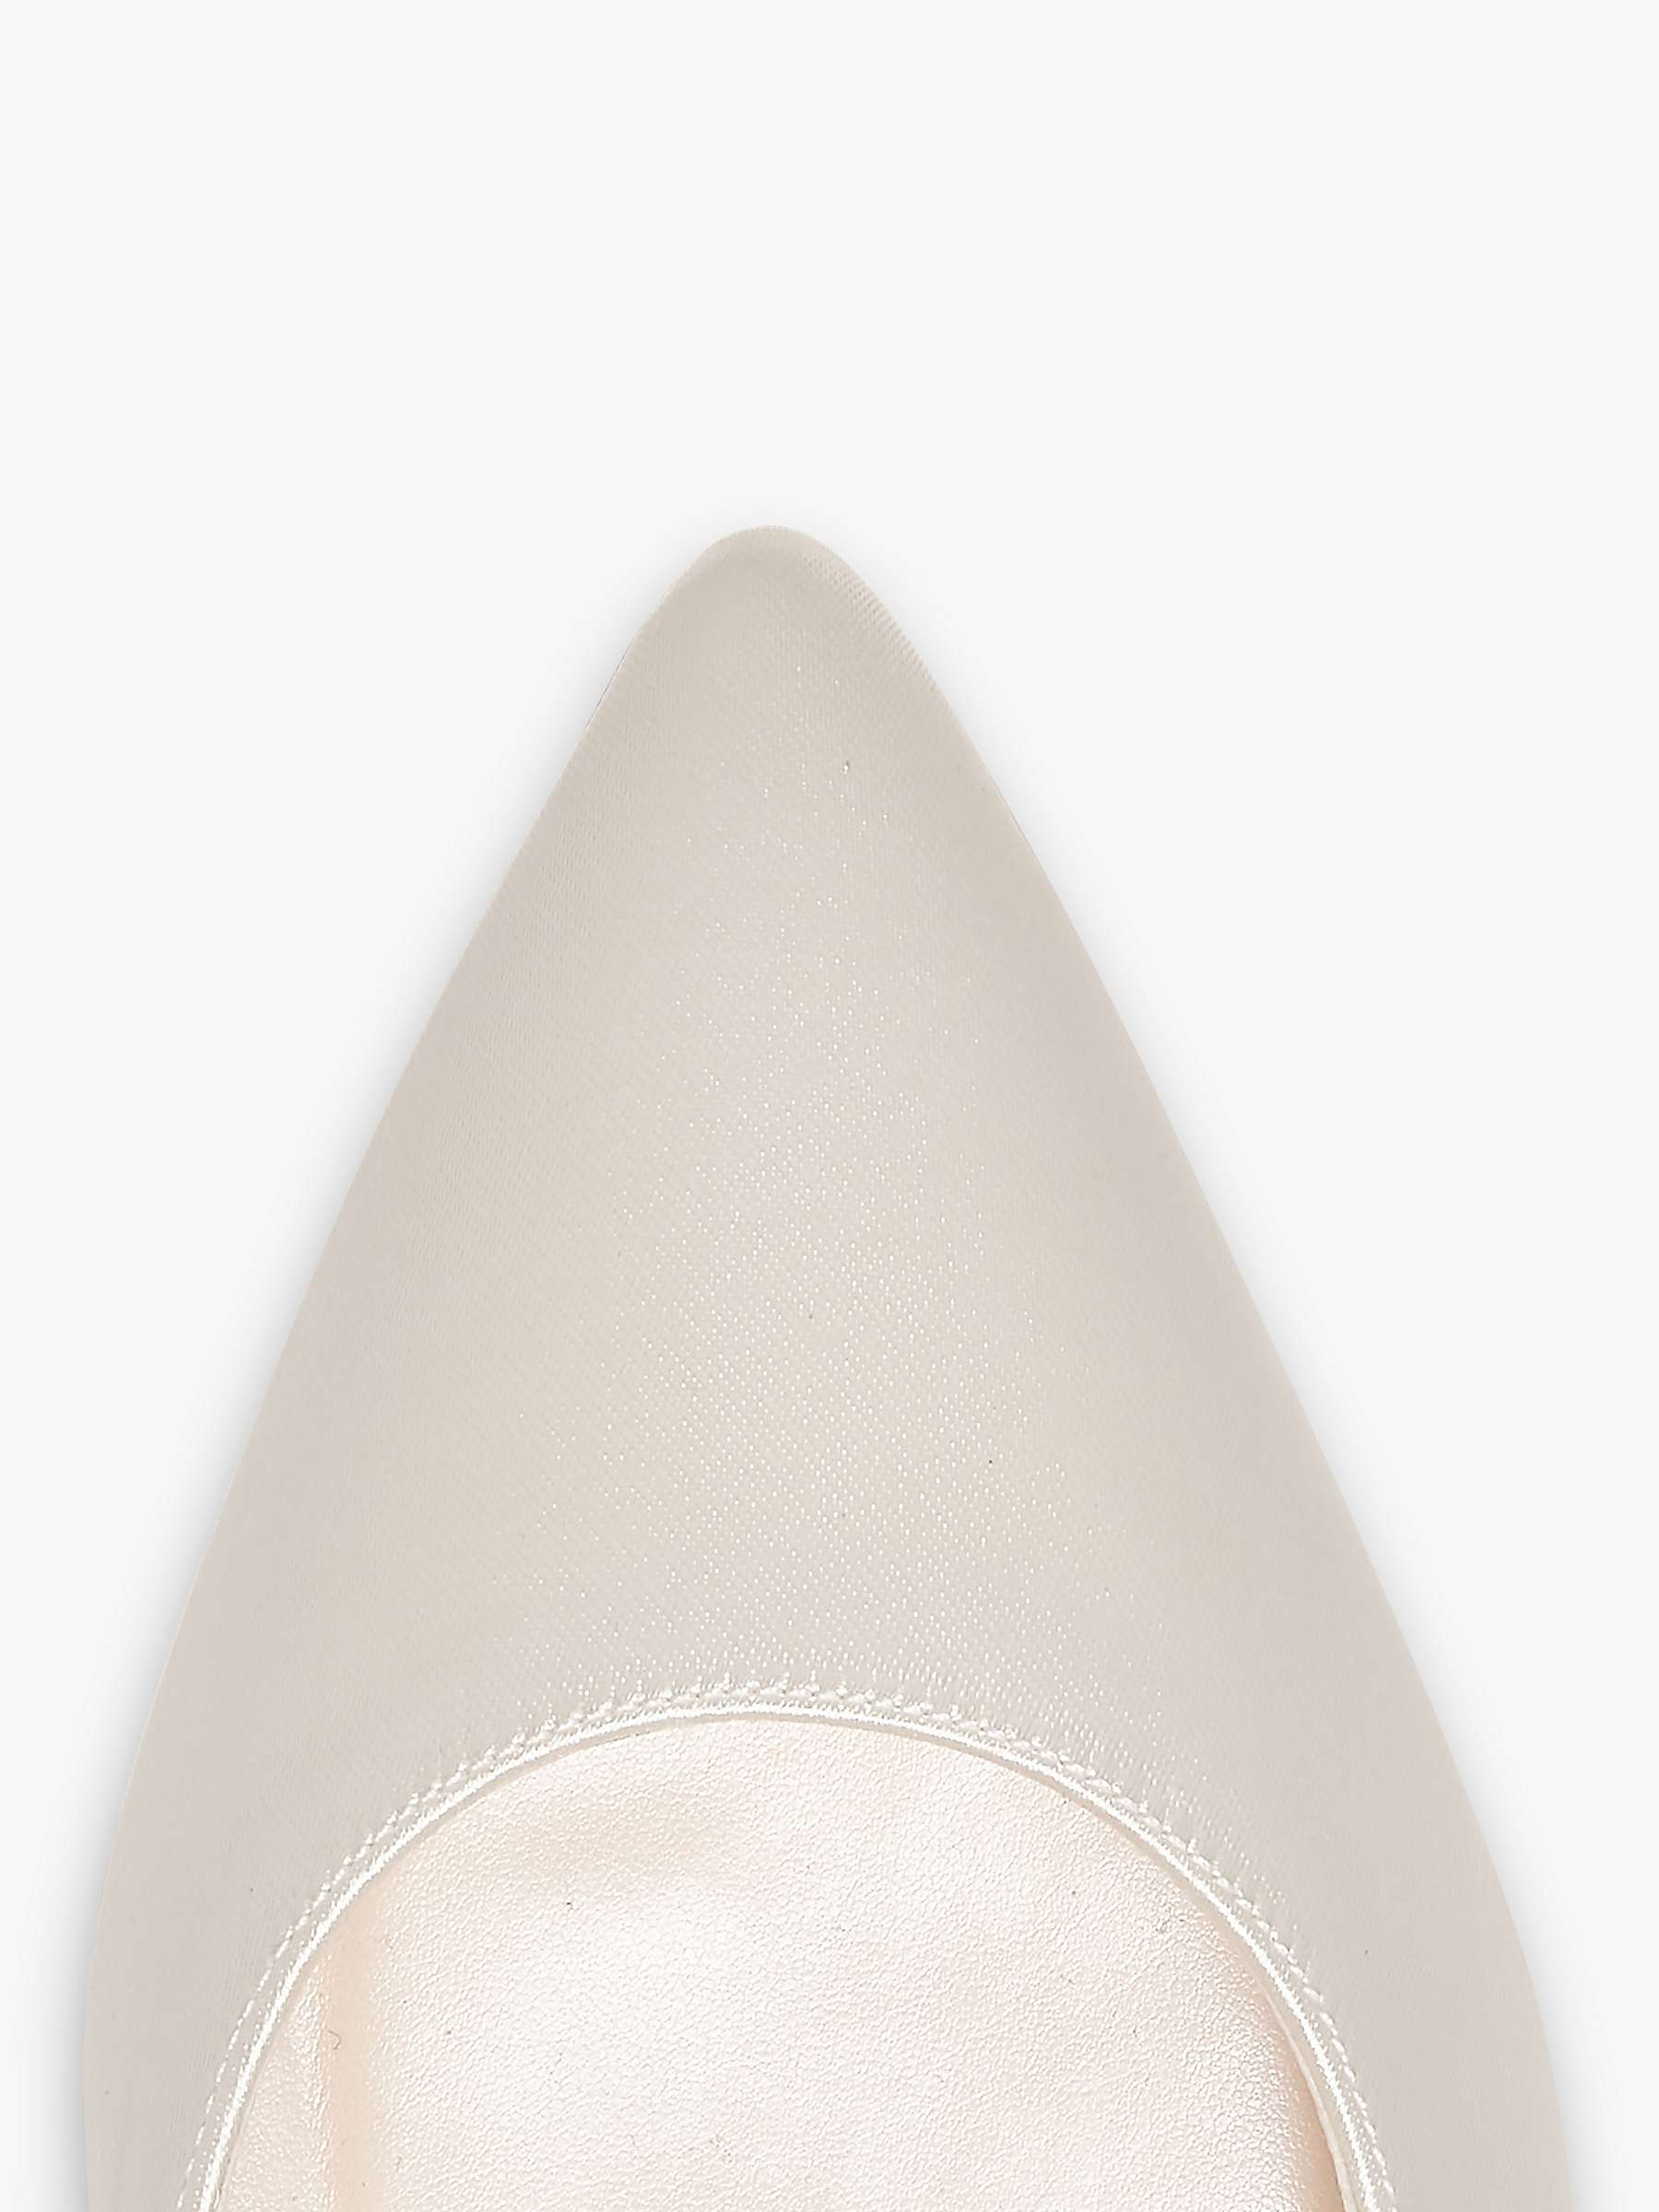 Rainbow Club Faith+Fit Wide Court Shoes, Ivory Satin at John Lewis ...